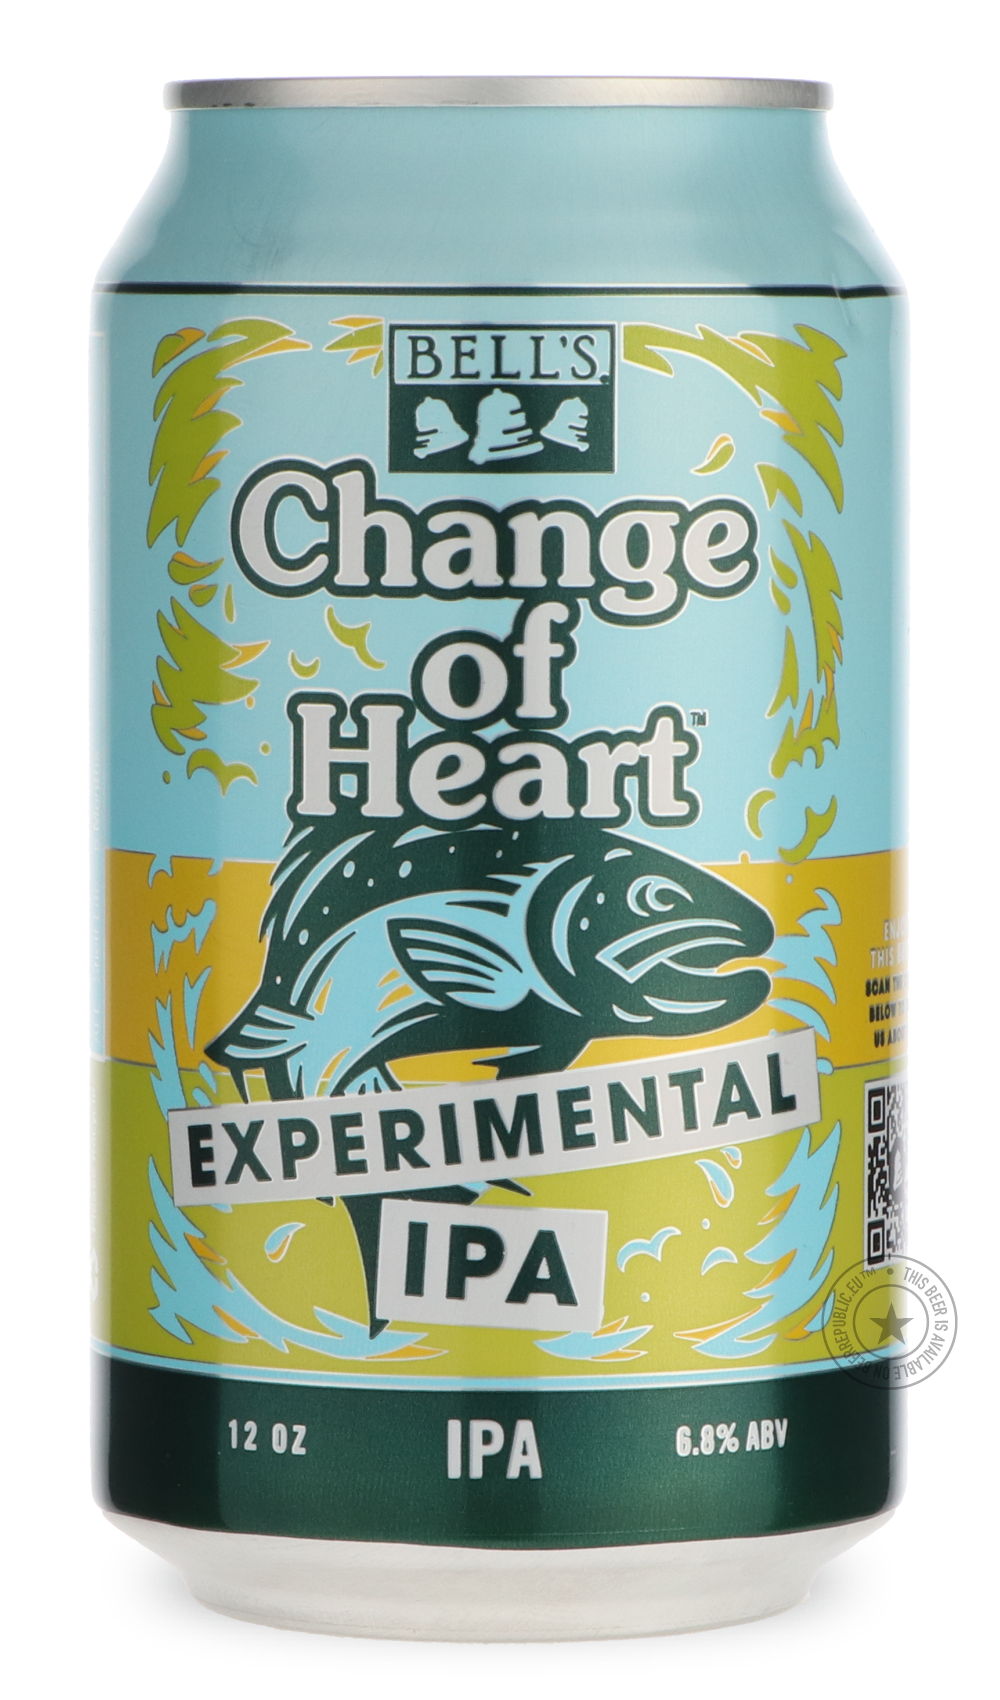 -Bell's- Change of Heart Experimental IPA-IPA- Only @ Beer Republic - The best online beer store for American & Canadian craft beer - Buy beer online from the USA and Canada - Bier online kopen - Amerikaans bier kopen - Craft beer store - Craft beer kopen - Amerikanisch bier kaufen - Bier online kaufen - Acheter biere online - IPA - Stout - Porter - New England IPA - Hazy IPA - Imperial Stout - Barrel Aged - Barrel Aged Imperial Stout - Brown - Dark beer - Blond - Blonde - Pilsner - Lager - Wheat - Weizen -